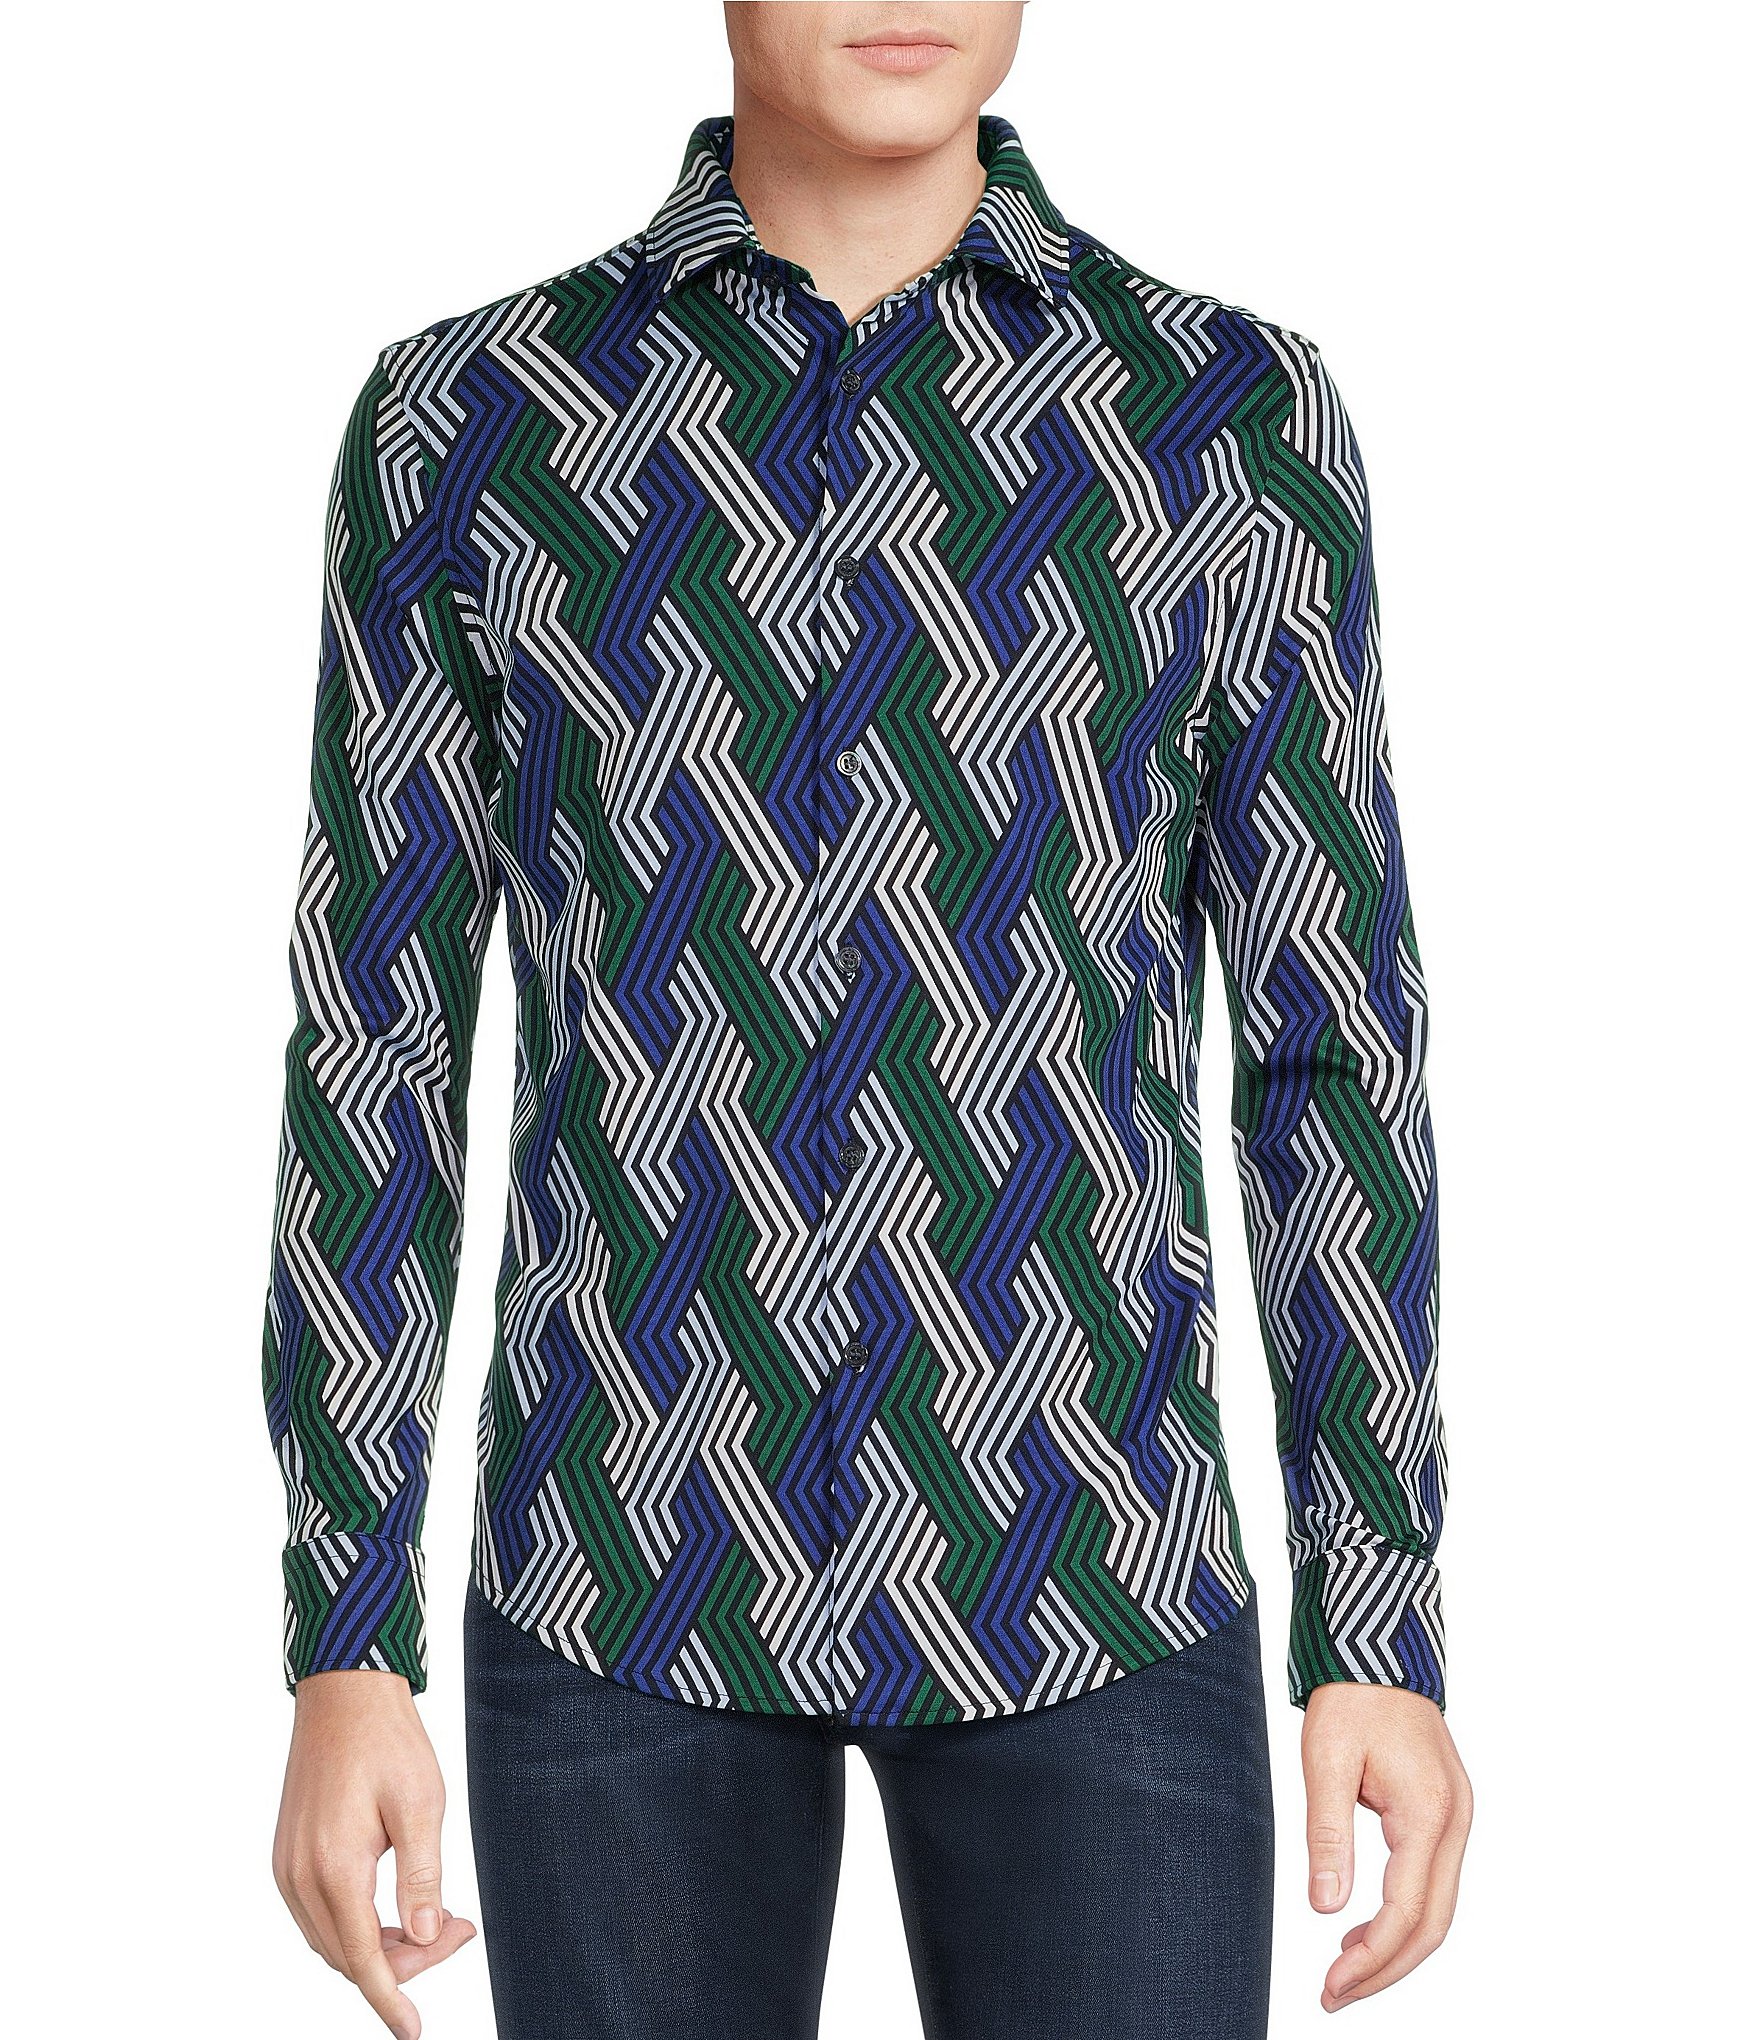 Murano Space | Sleeve Long Collection Shirt Zigzag Coatfront to Back Dillard\'s Printed Slim Fit